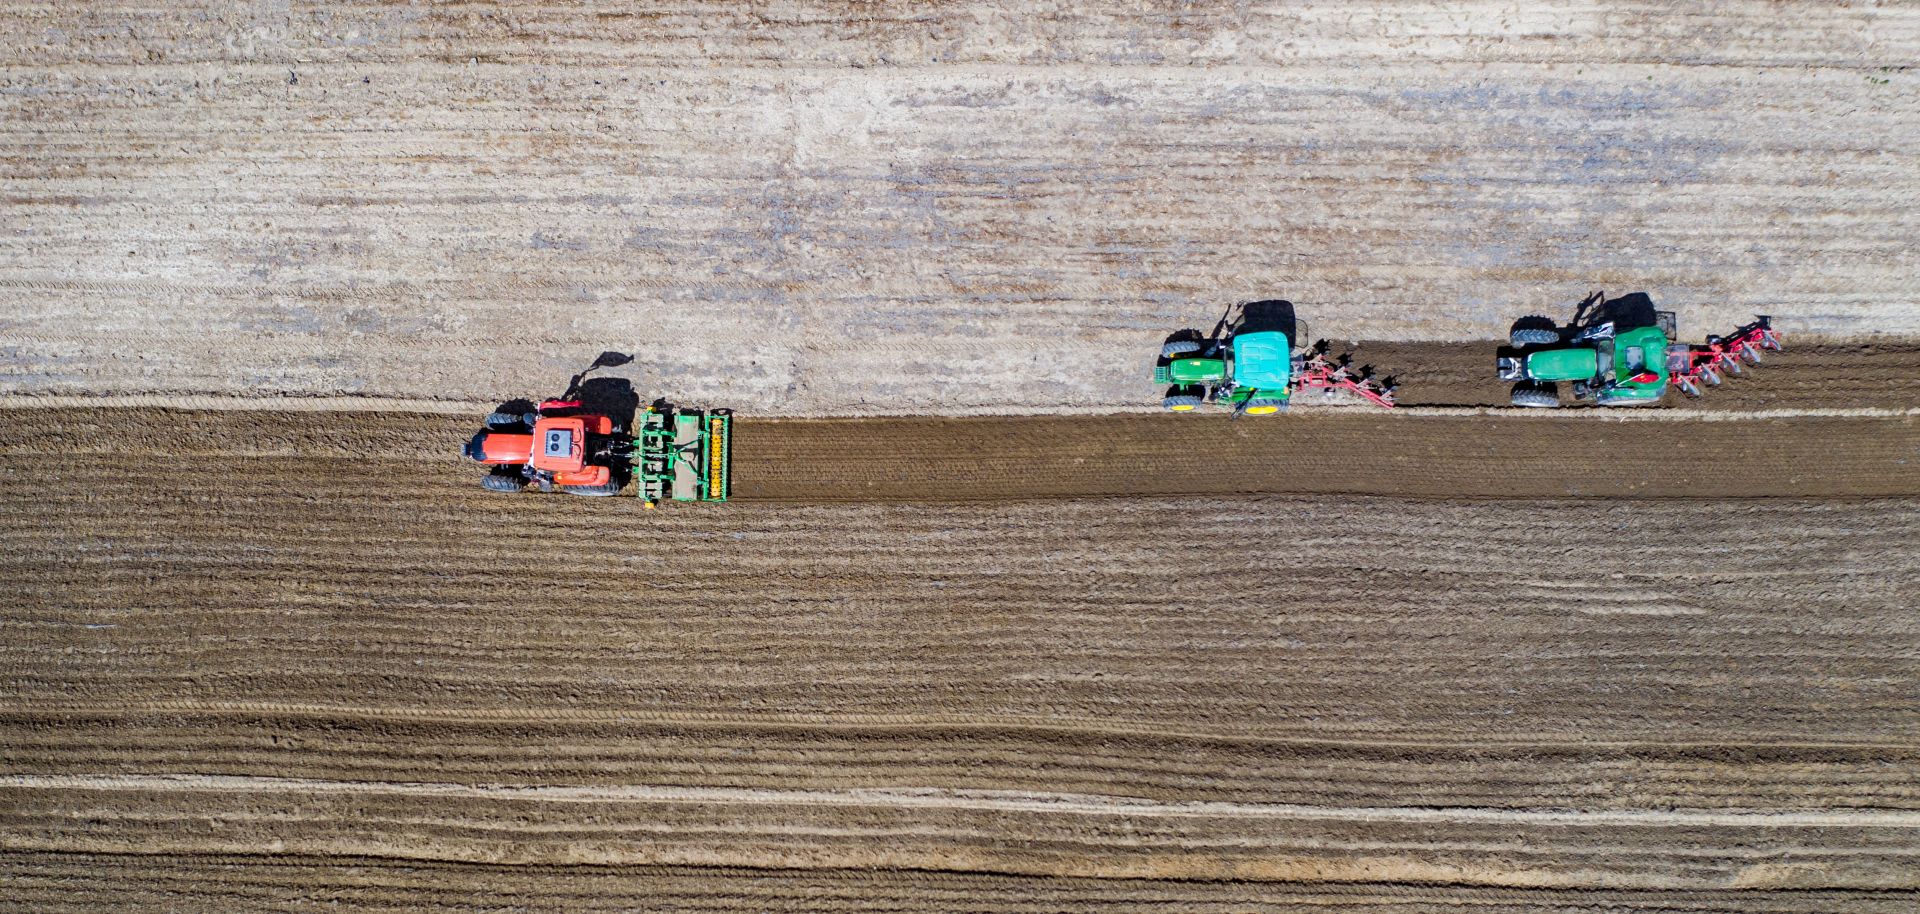 An aerial photo shows villagers sowing highland barley seeds with agricultural machinery in the fields in Lhasa, the capital of China's Tibet Autonomous Region, on April 22, 2020. 